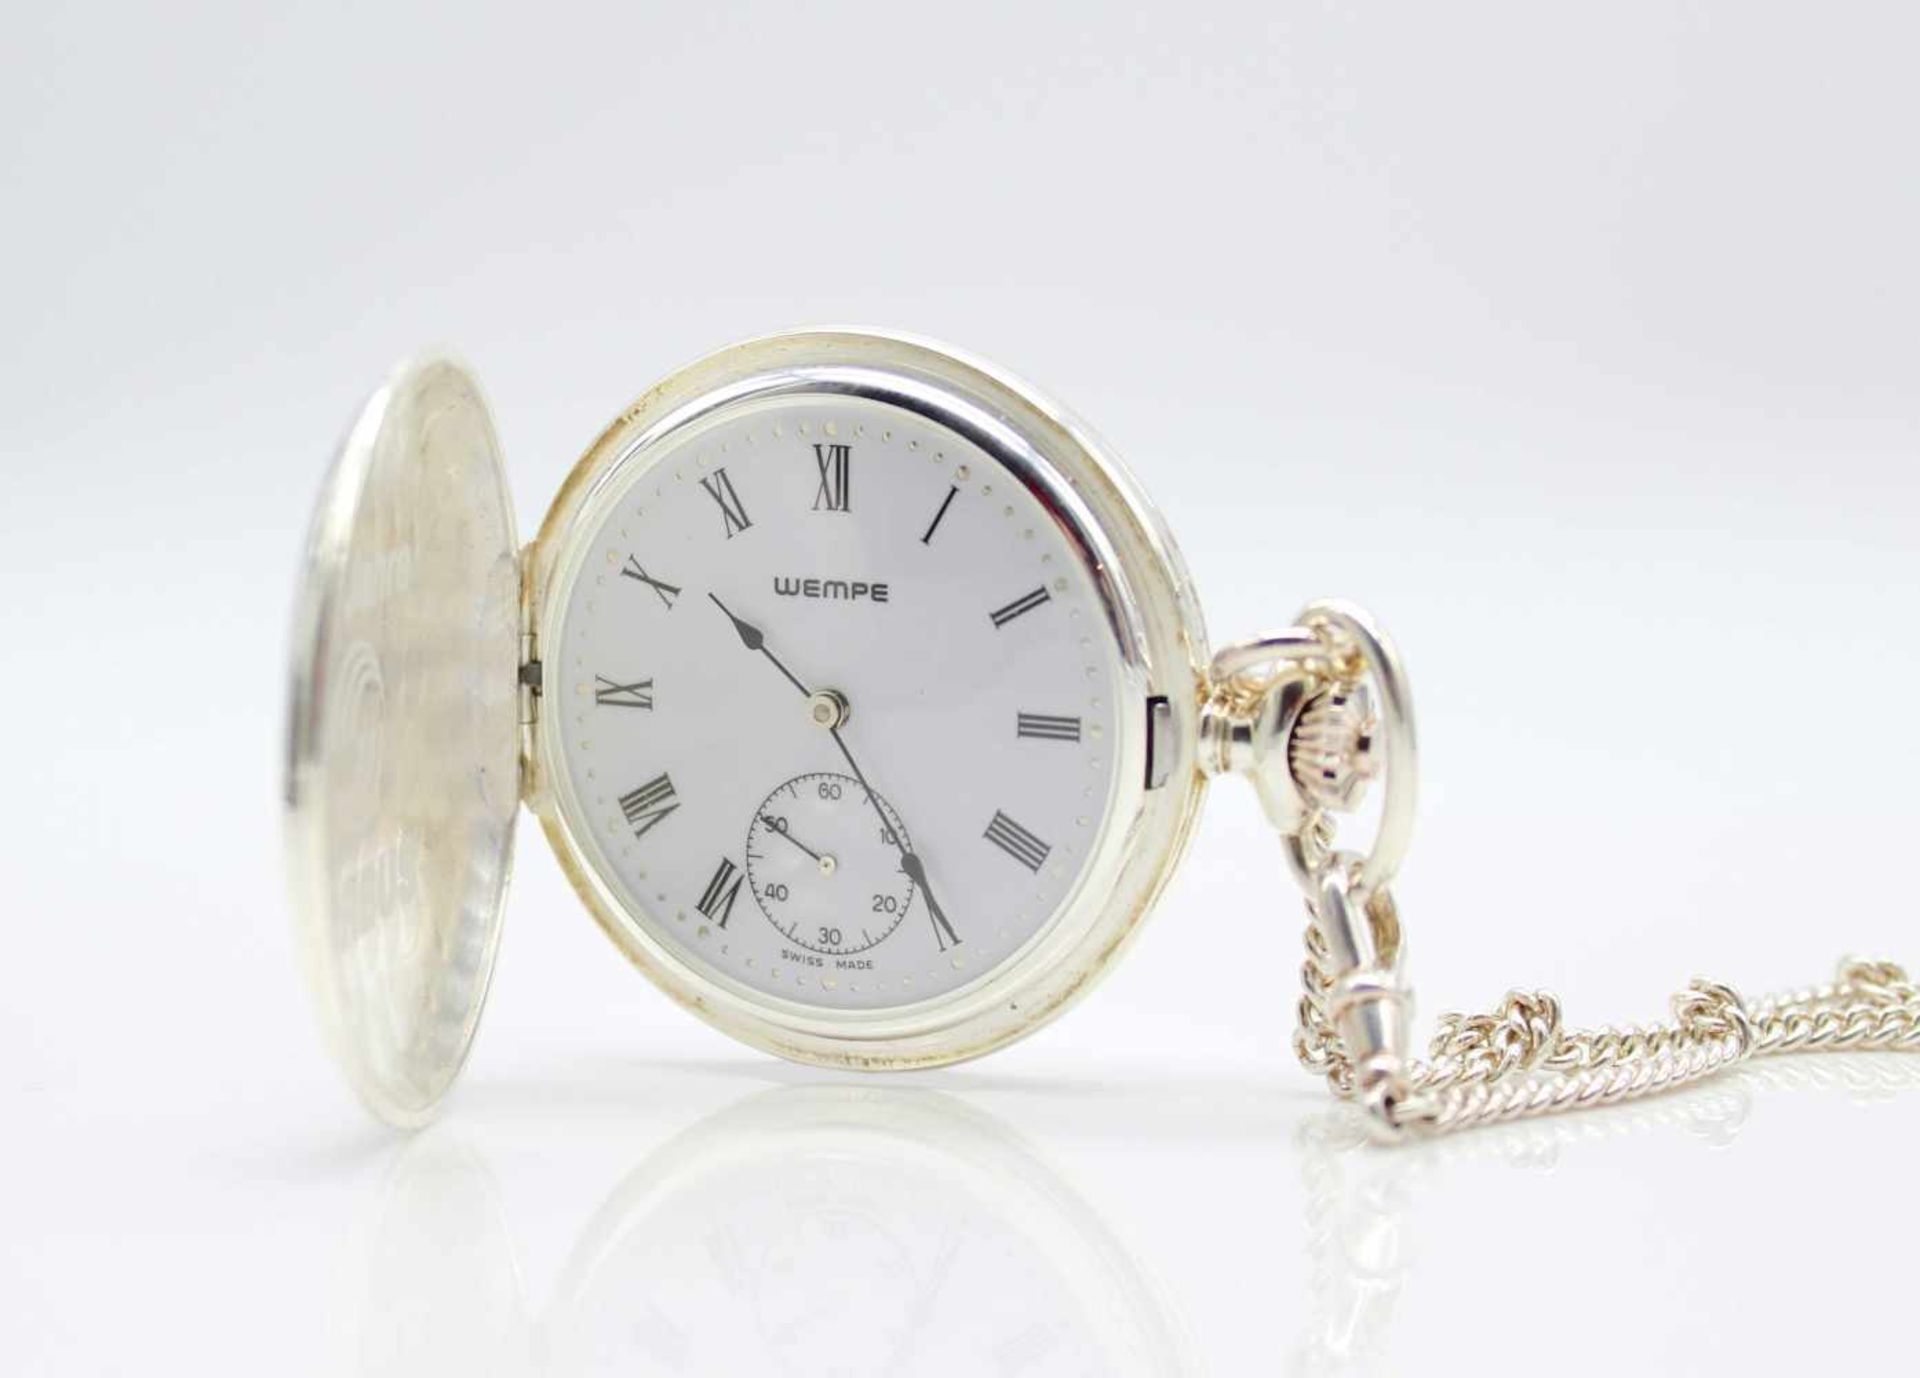 Pocket watch with chain by Wempe, No. FCZZ 0015, made of 925 silver with engraving 25 years - Bild 2 aus 5